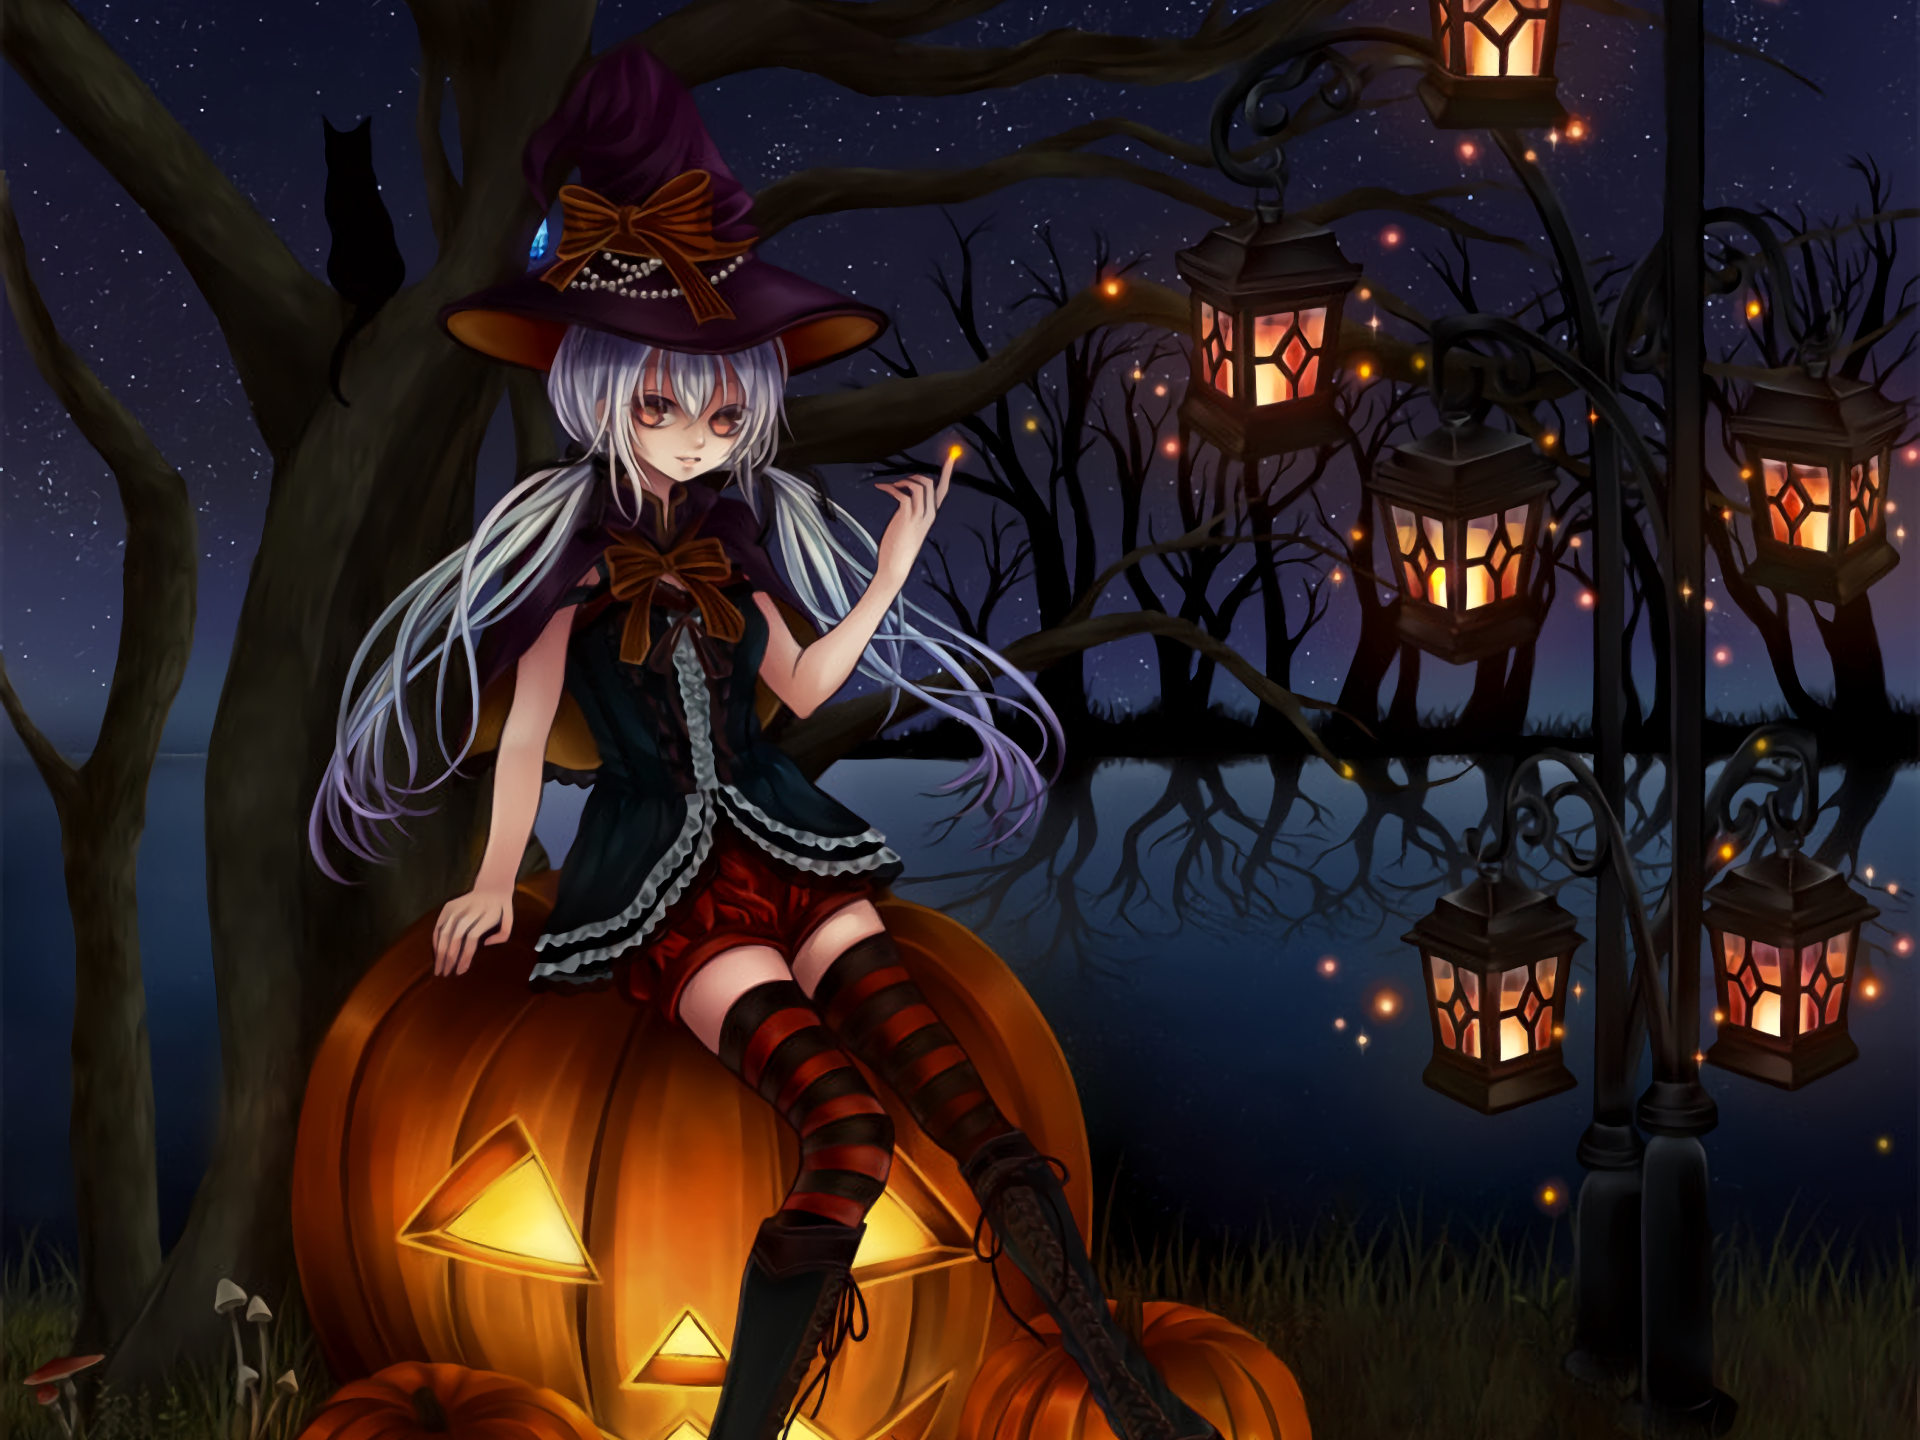 Witchy Anime Girl with Pumpkins Halloween Wallpaper for iPhone-demhanvico.com.vn